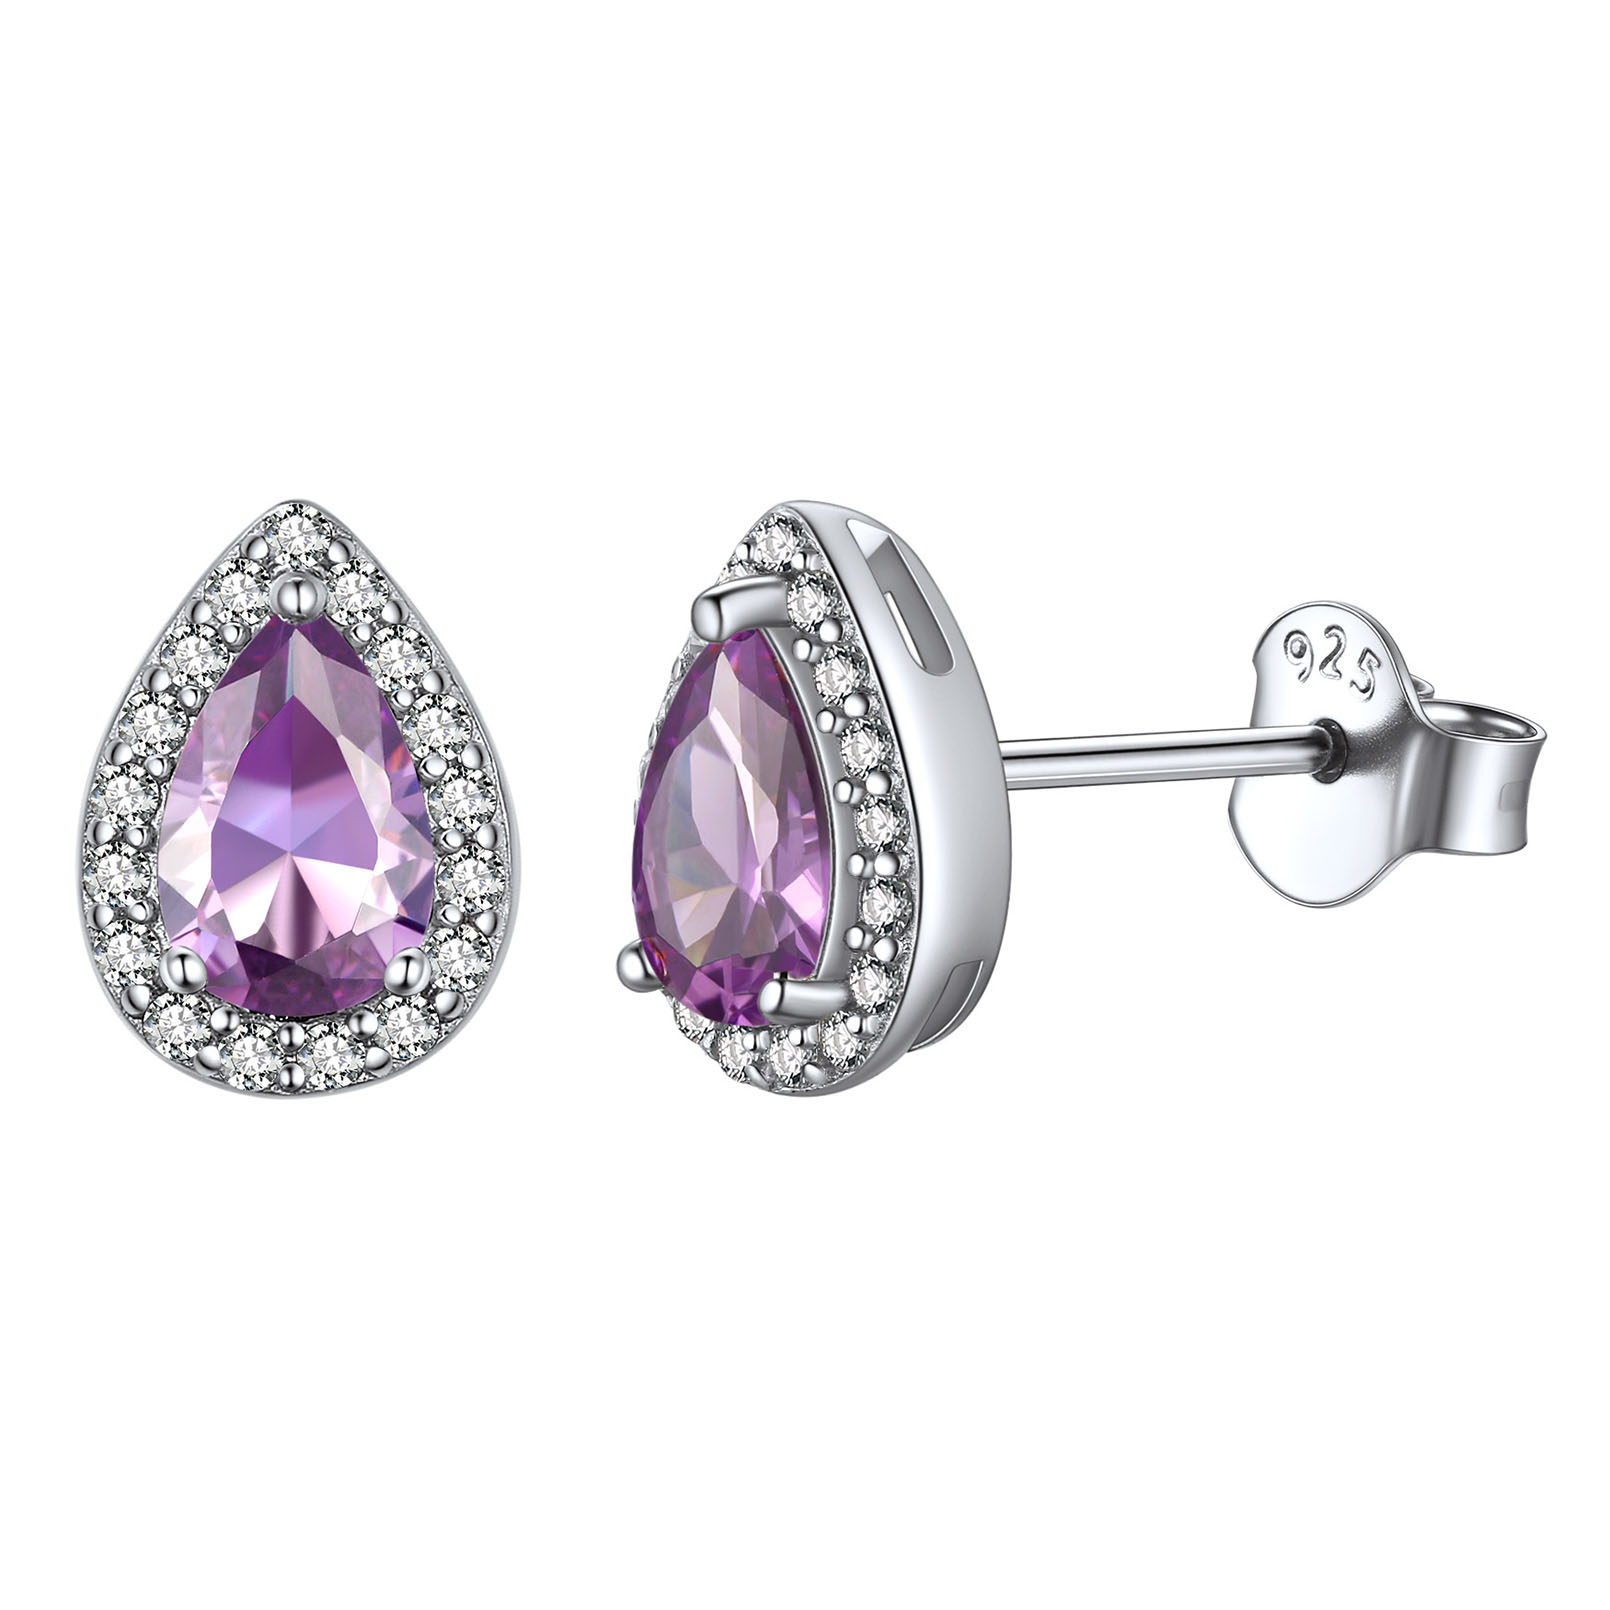 0.33inch 8mm Sterling Silver Simulated Amethyst Heart Post Stud Earrings